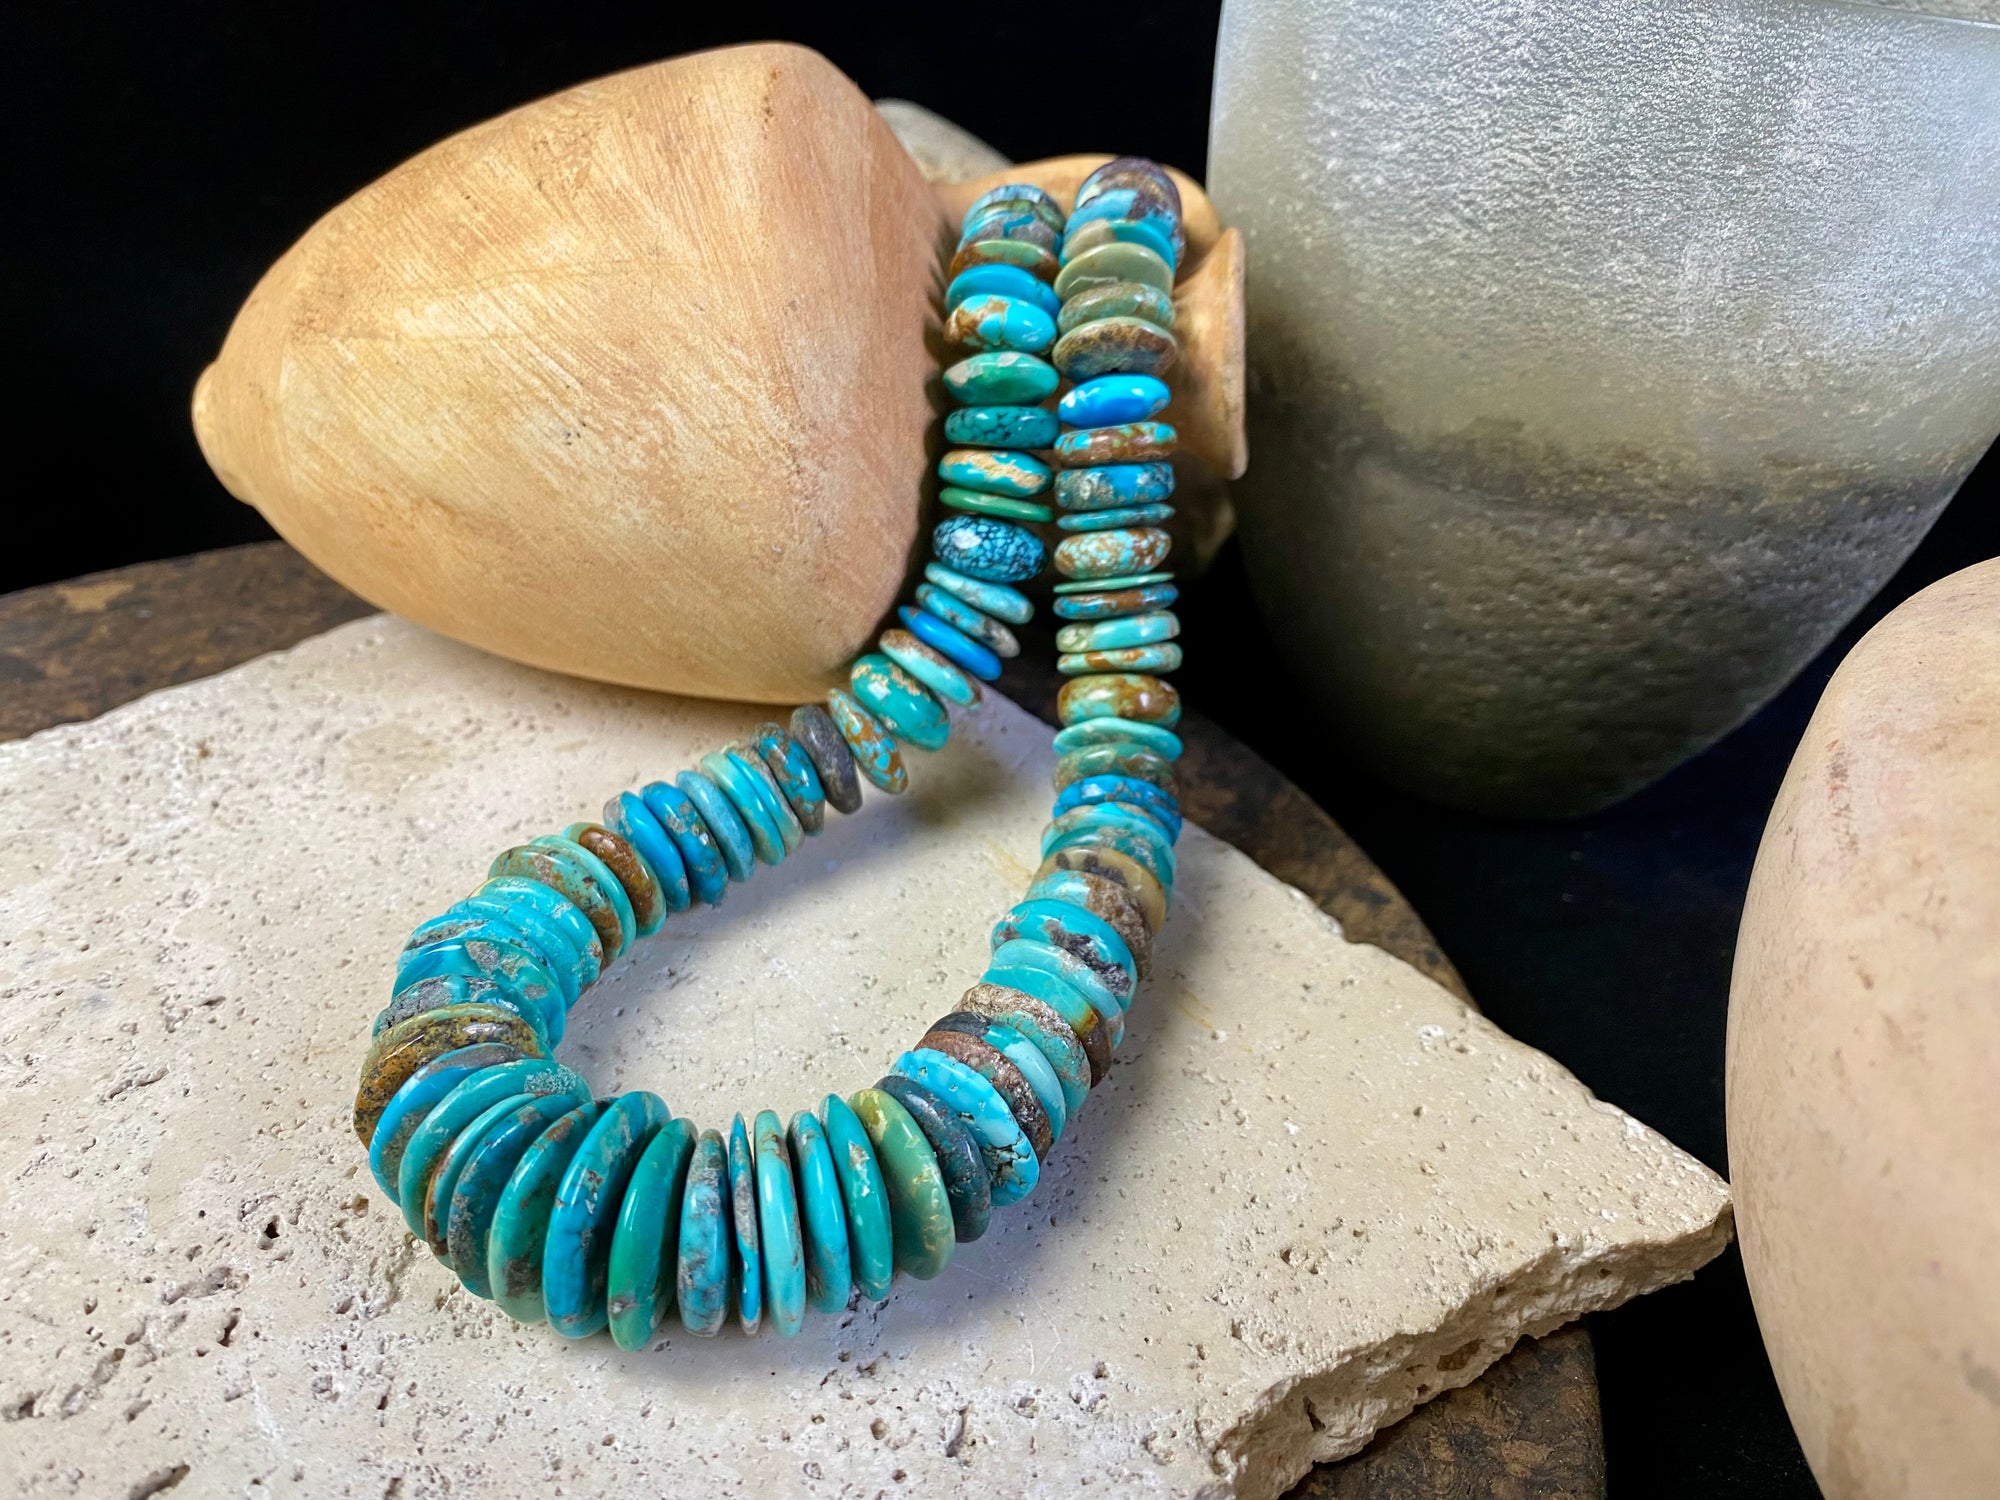 Stunning bright blue Arizona turquoise necklace featuring graduated disks of Arizona turquoise finished with sterling silver. Length 47.5 cm